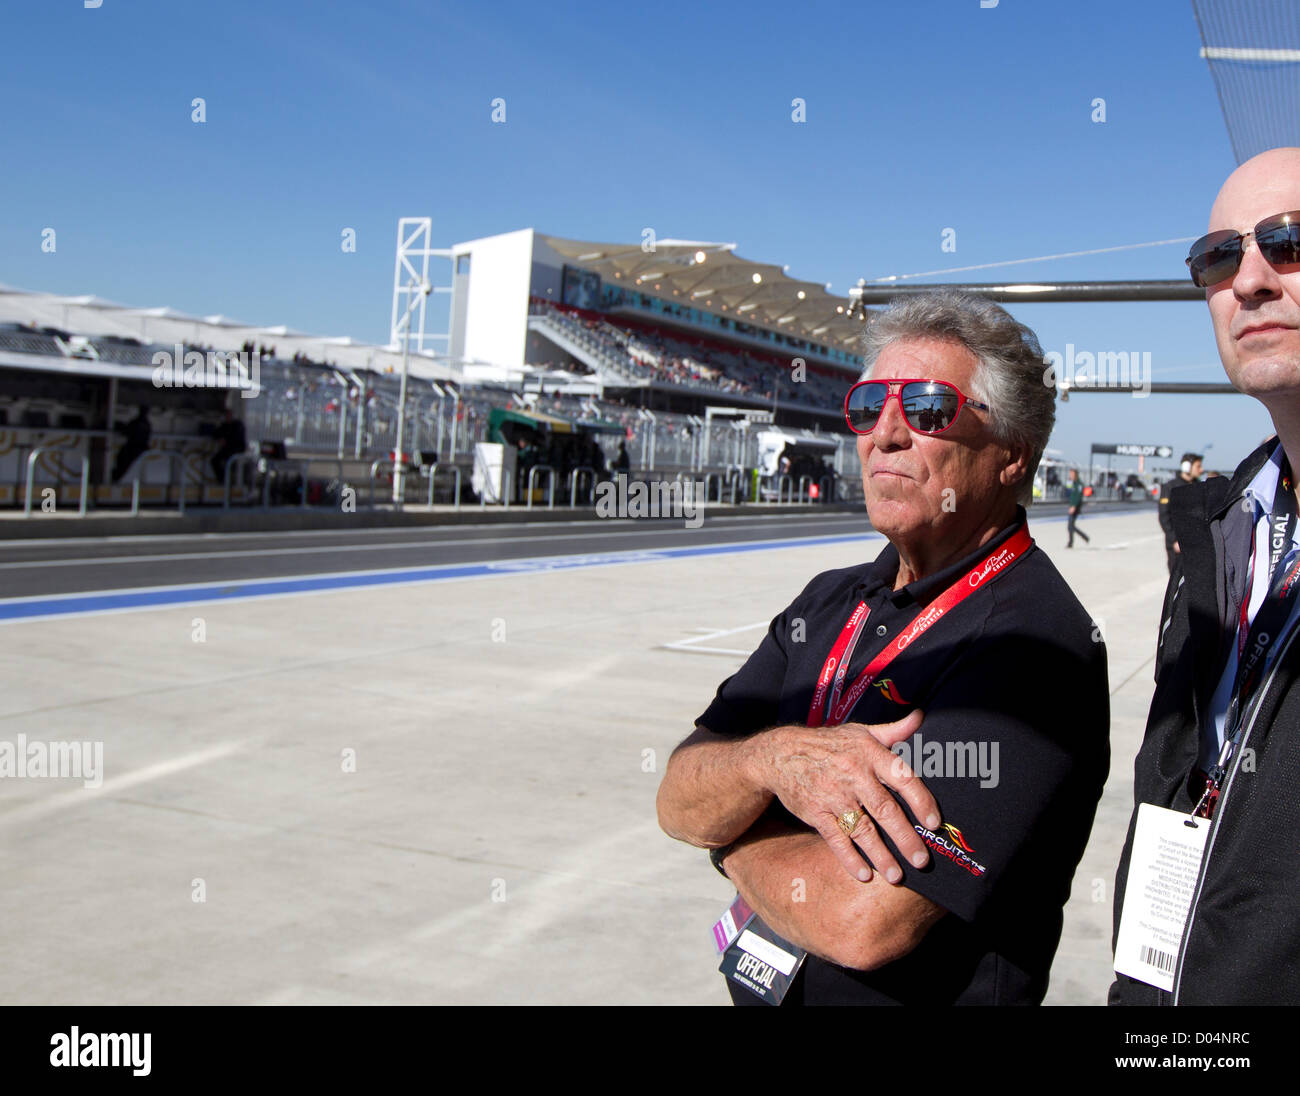 Legendary F1 driver Mario Andretti, 72, watches practice for the F1 United States Grand Prix at Circuit of the Americas track Stock Photo